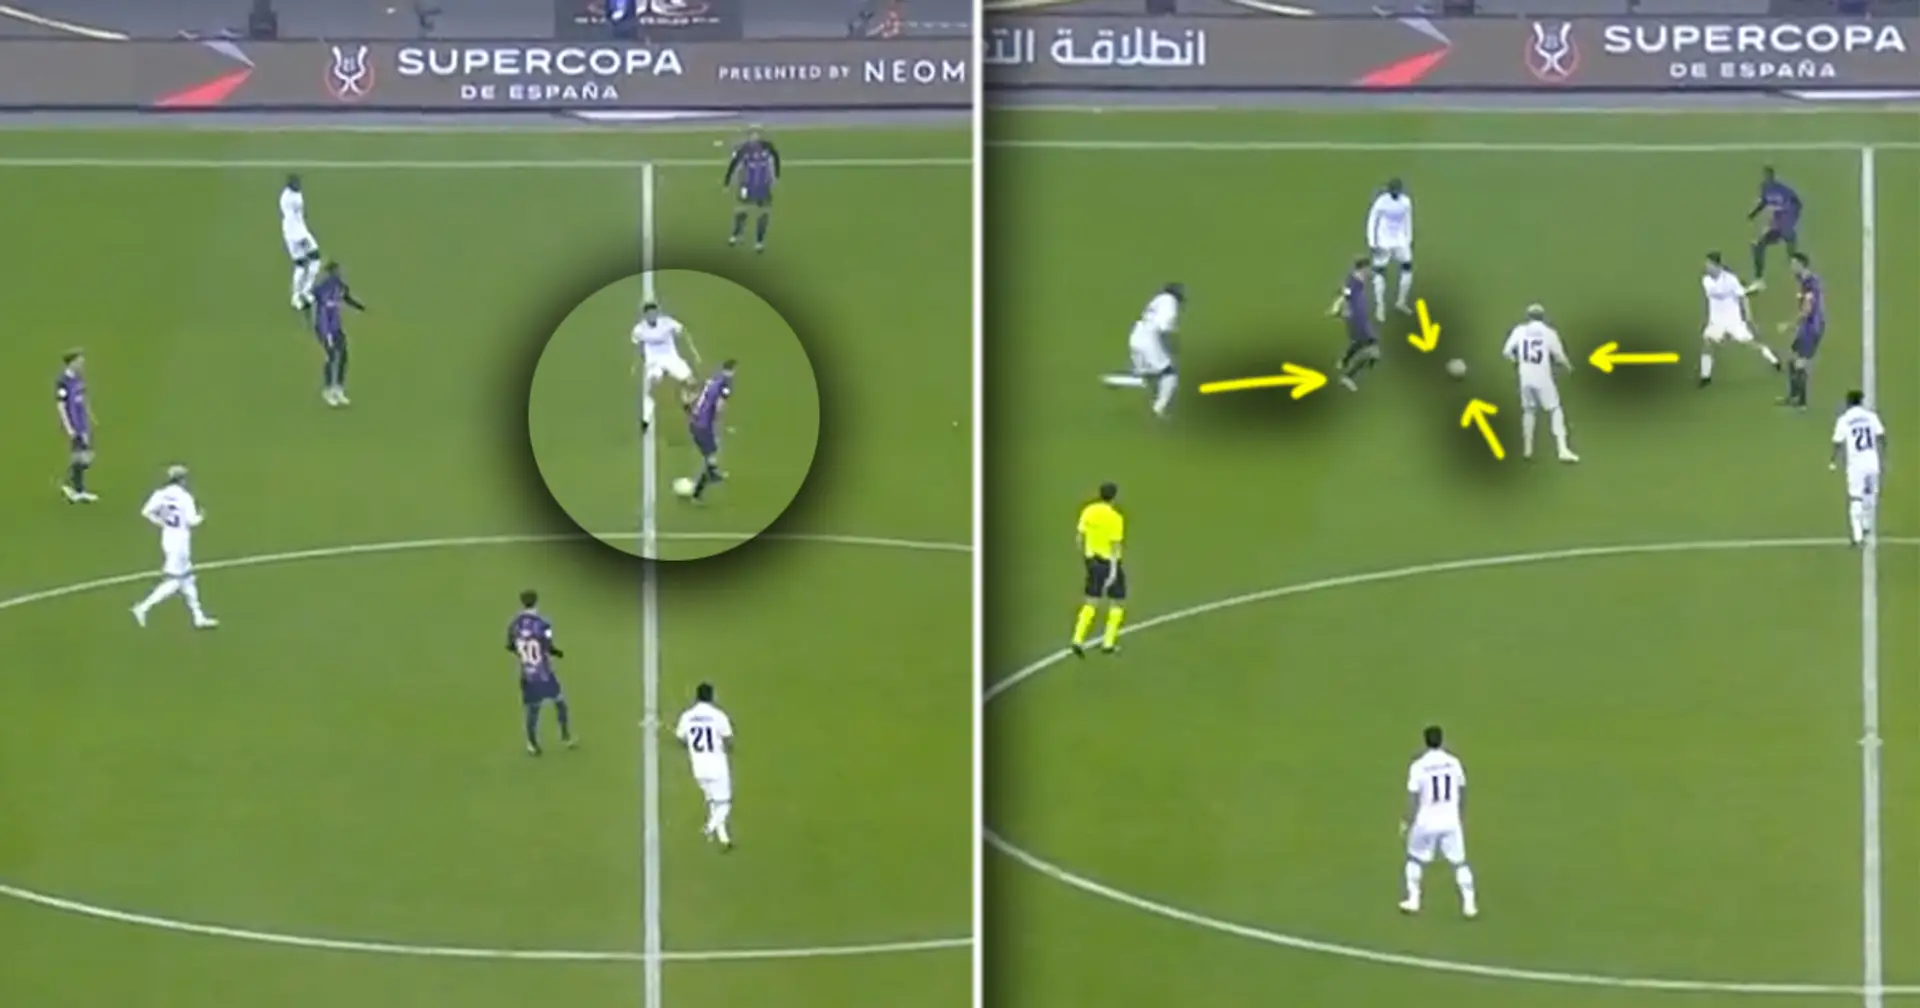 'I feel like a 9-year-old again': Barca's cheeky passing sequence v Real Madrid goes viral